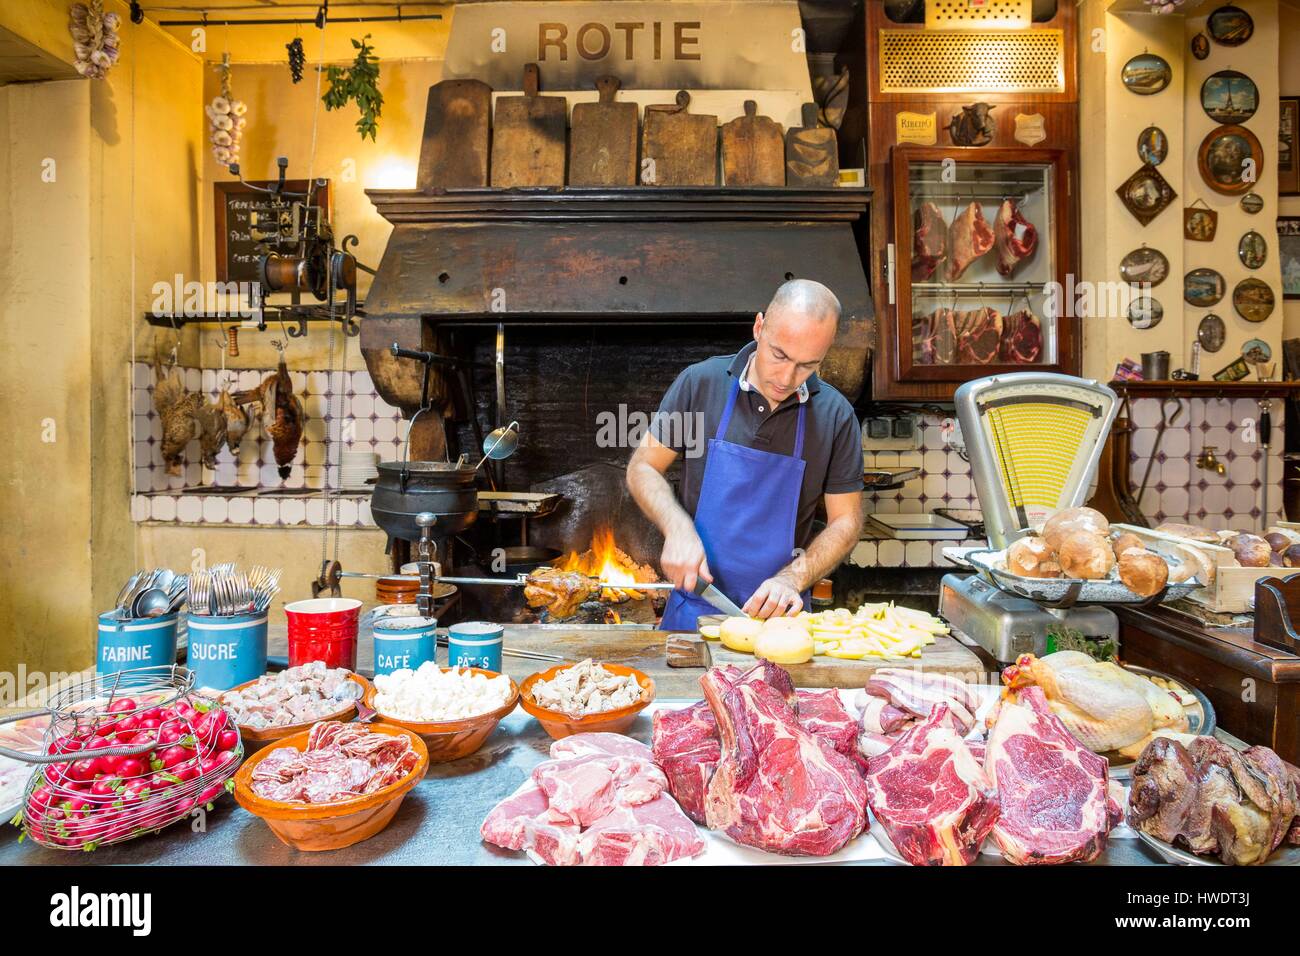 France, Gironde, Bordeaux, Porte de la Monnaie street, restaurant La Tupina founded in 1968 by Jean-Pierre Xiradakis and specialized in South-West cuisine, preparing French fries and grilled meats Stock Photo